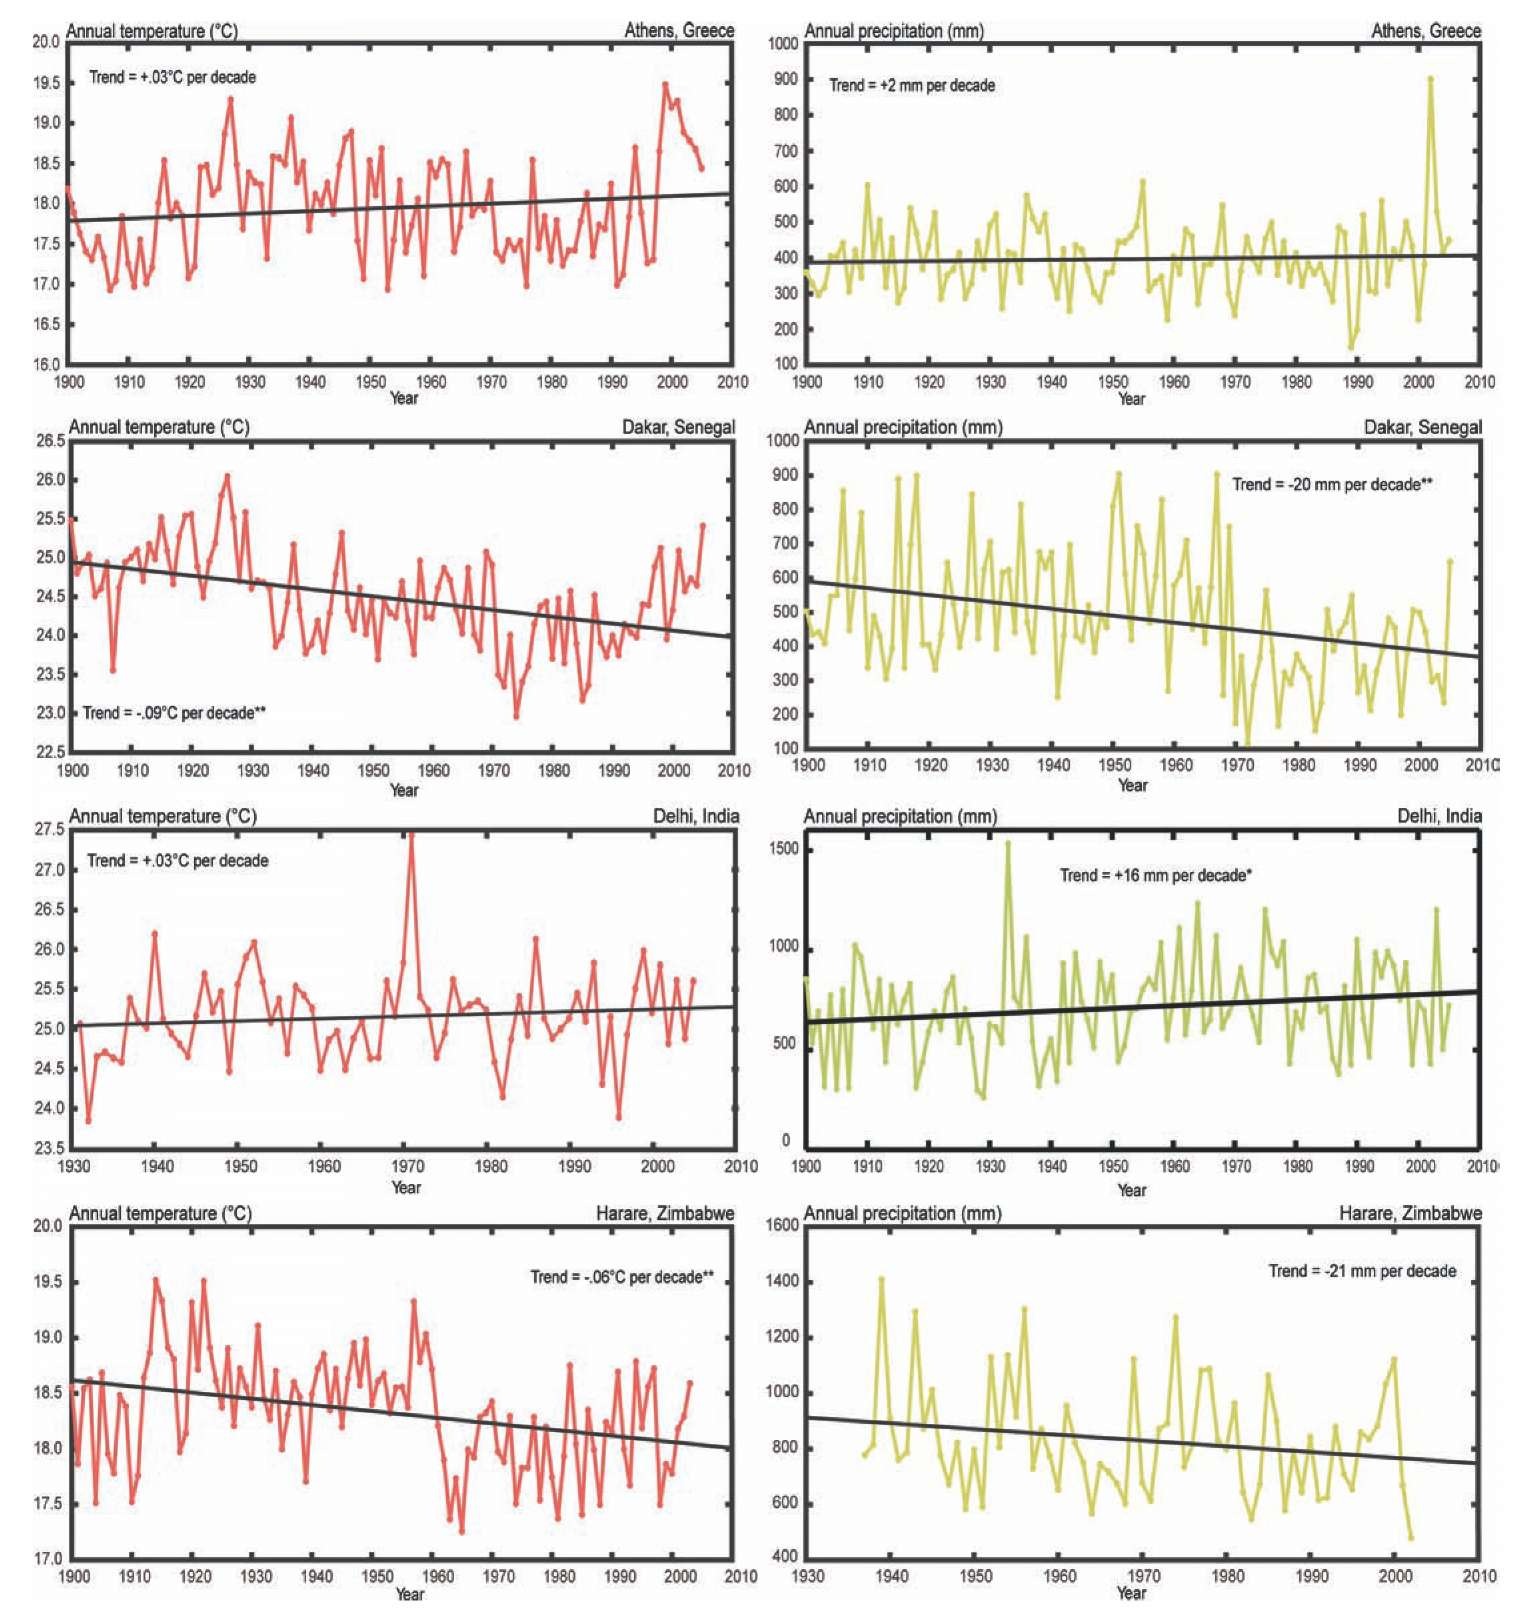  Observed climate trends in cities. Trends and statistical significance are shown for the data available for the twentieth century (see Table 3.2 for specific years for each city). Note differences in temperature and precipitation scales. 